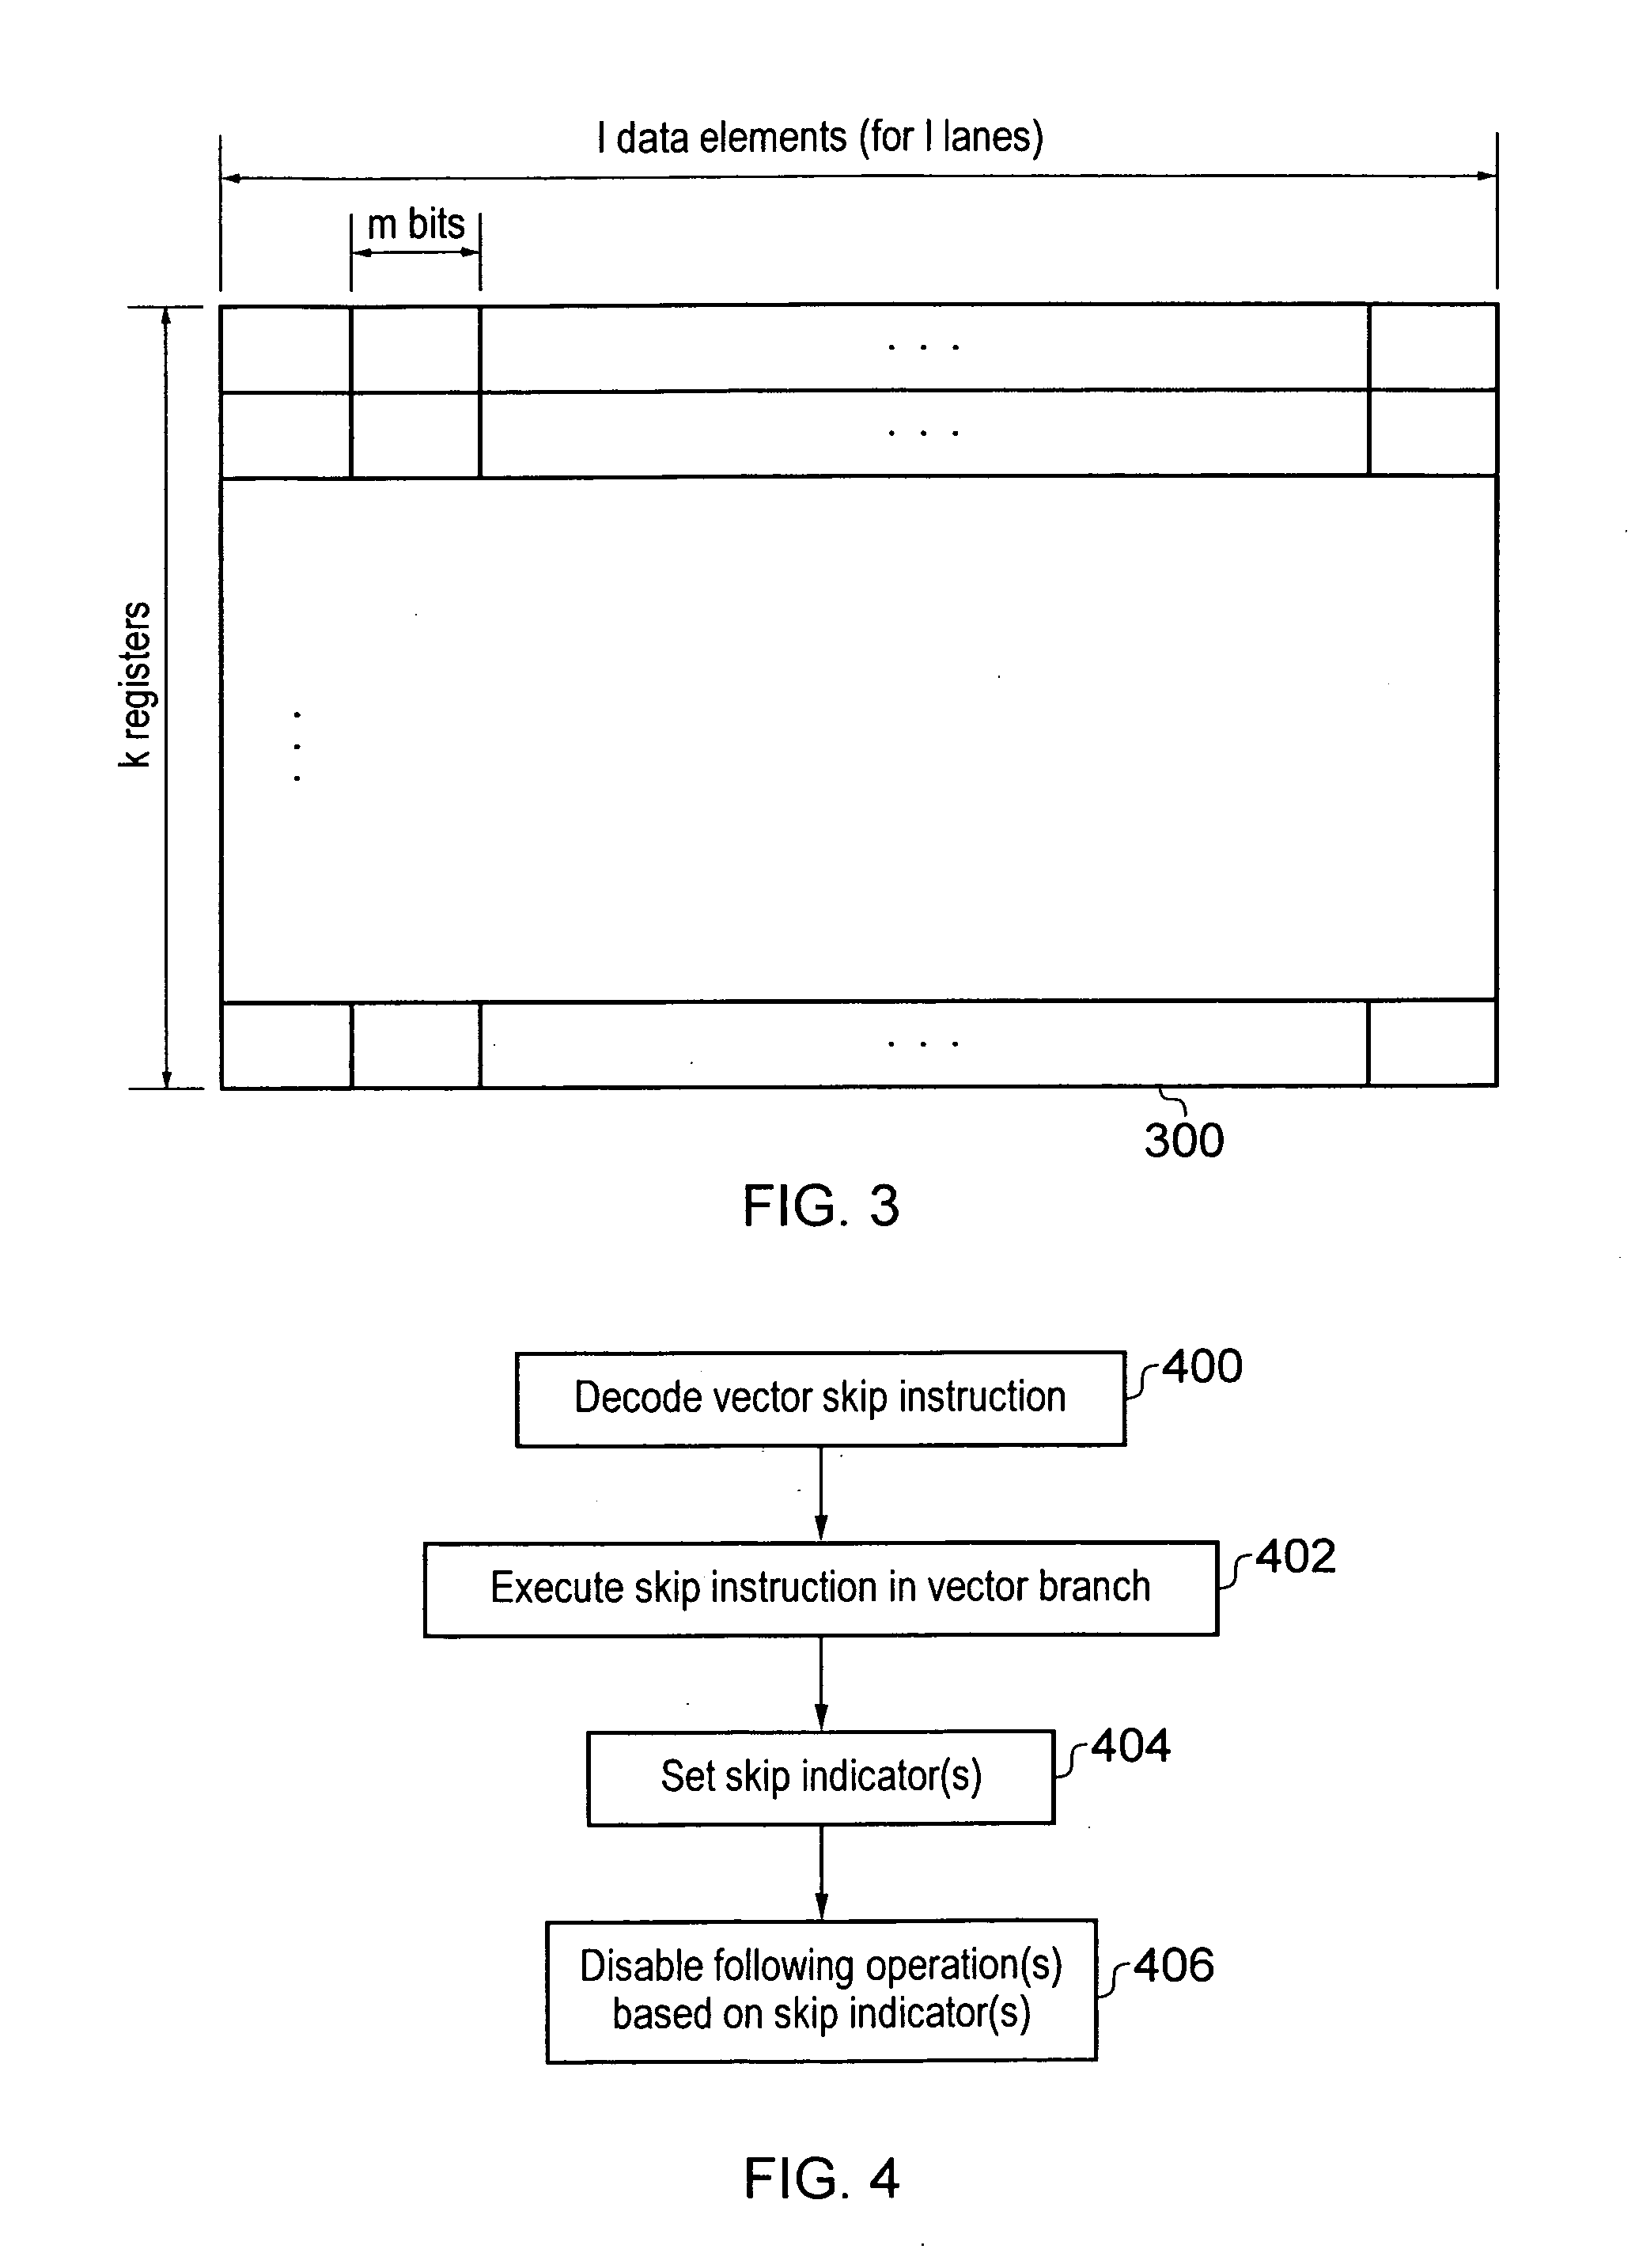 Data processing apparatus and method for handling vector instructions